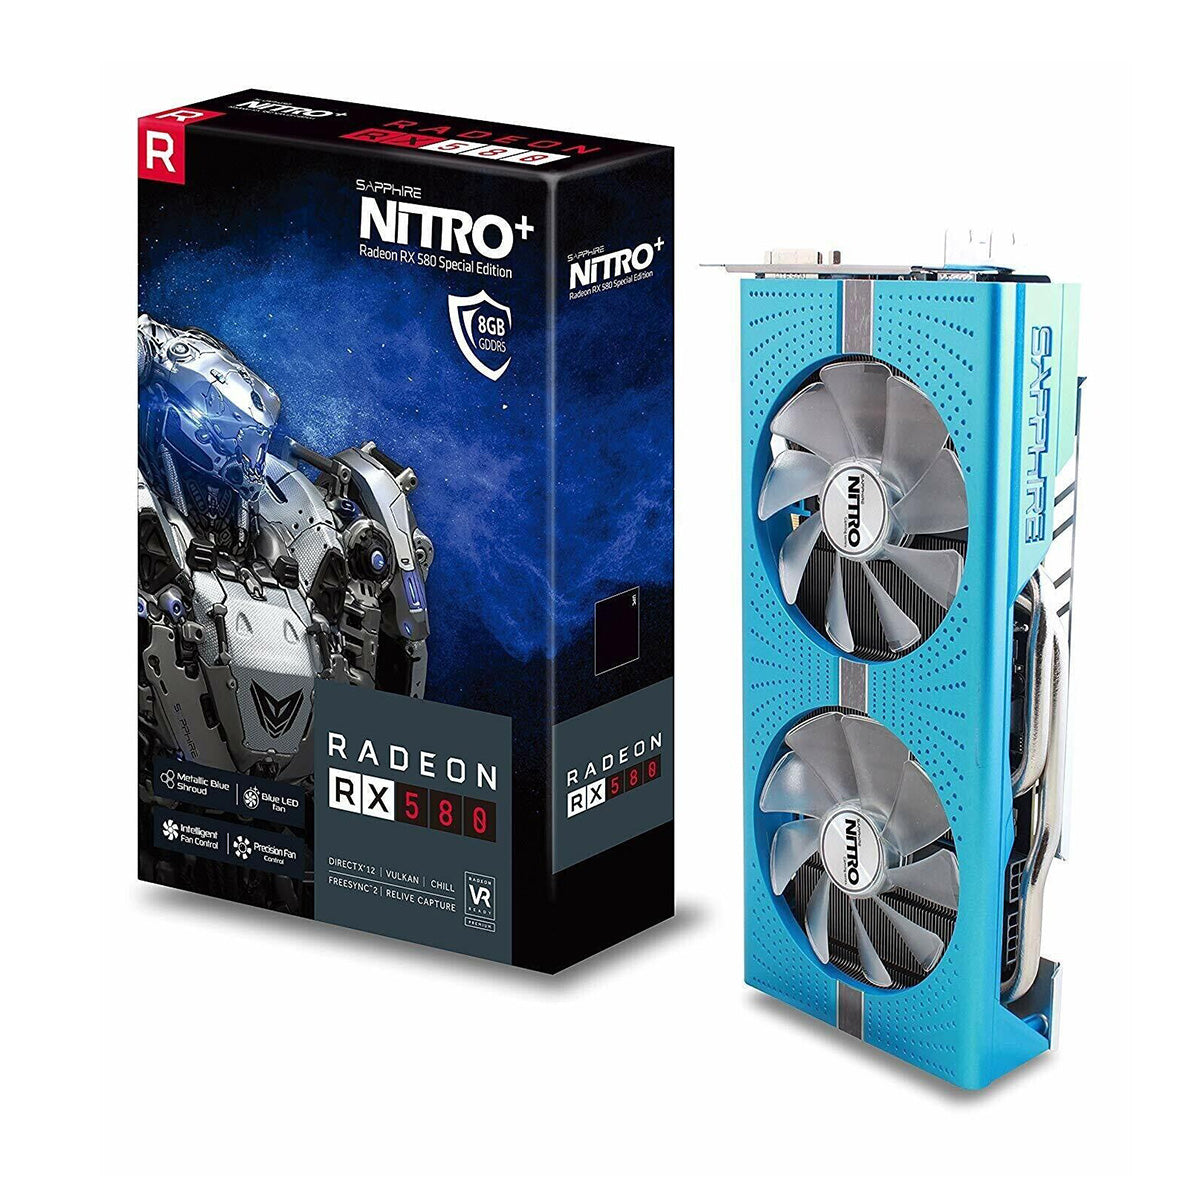 8GB Sapphire NITRO+ Gaming RX580 G5 Special Edition Blue PCI Express Video Card